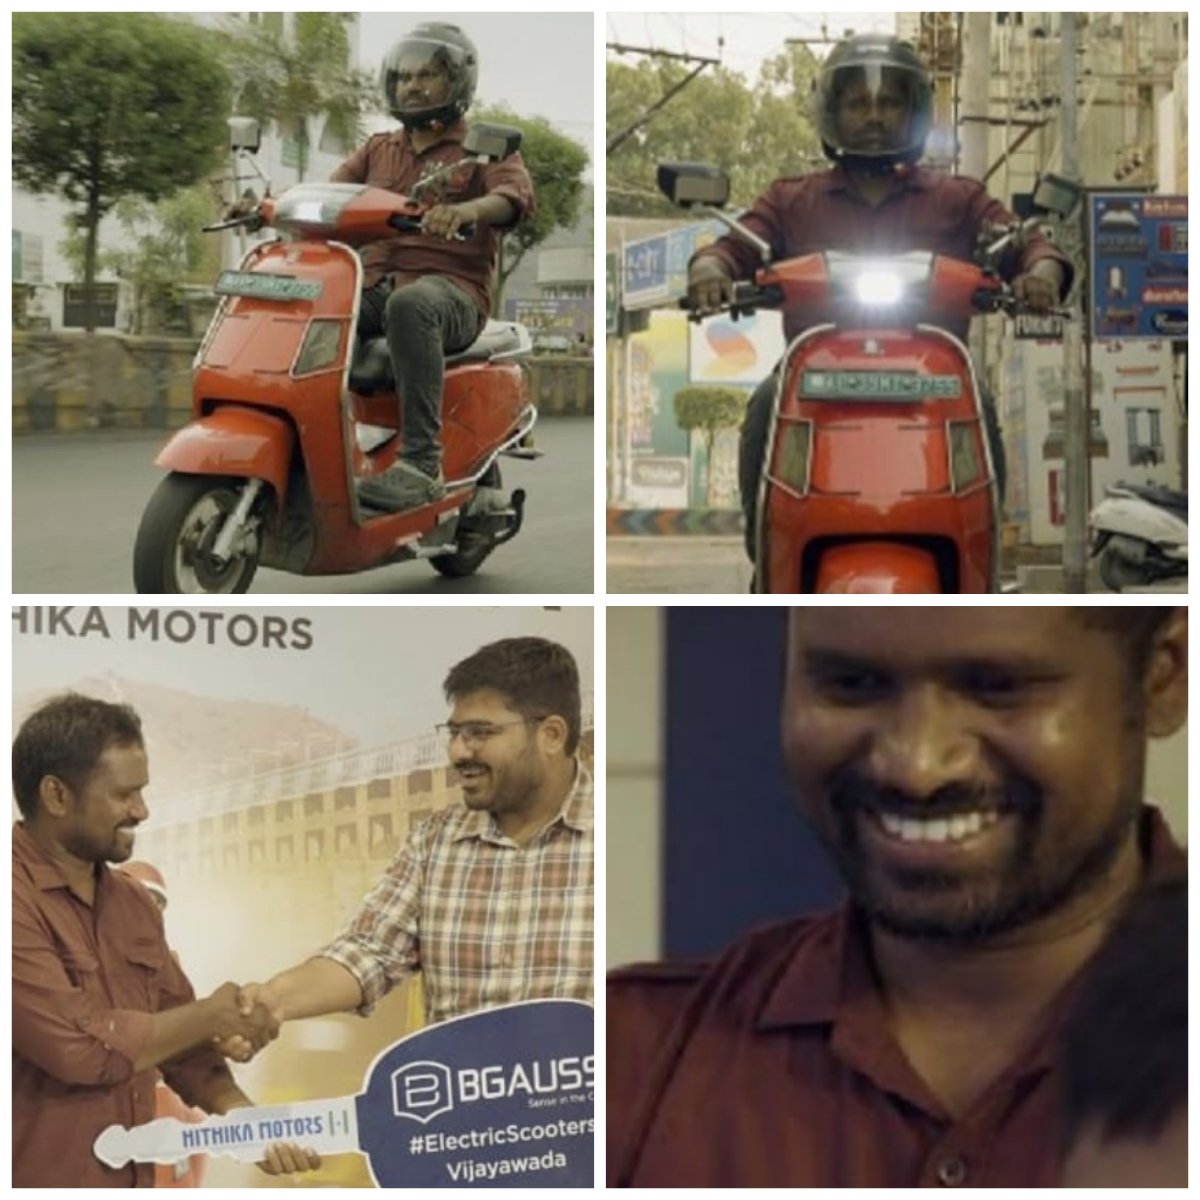 Hard work pays off...🫡
BGauss surprises their loyal customer who completed 1 lakh km in 2 years with the official 1st product of their new e-scooter.